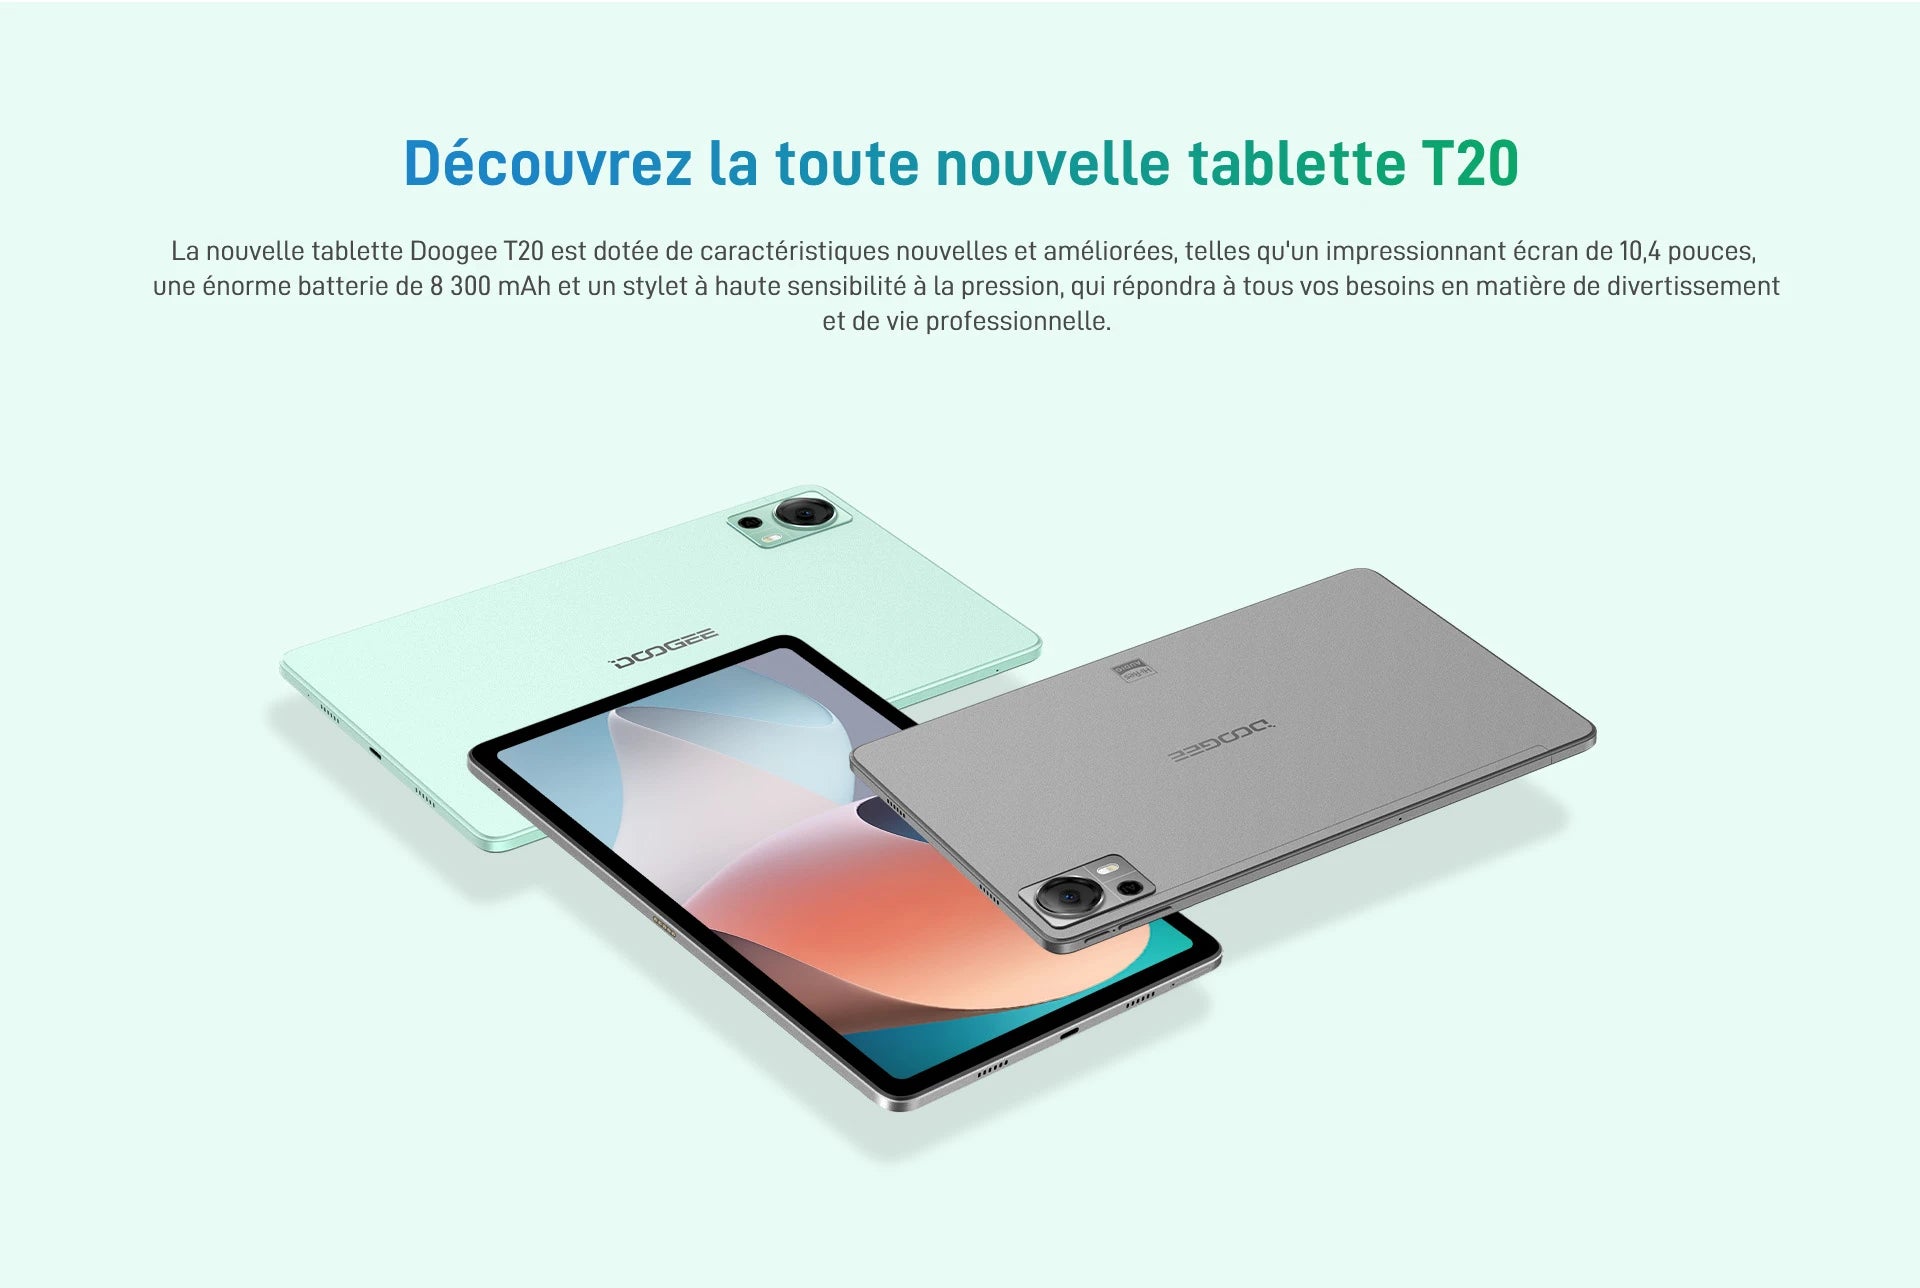 Doogee T20 french description